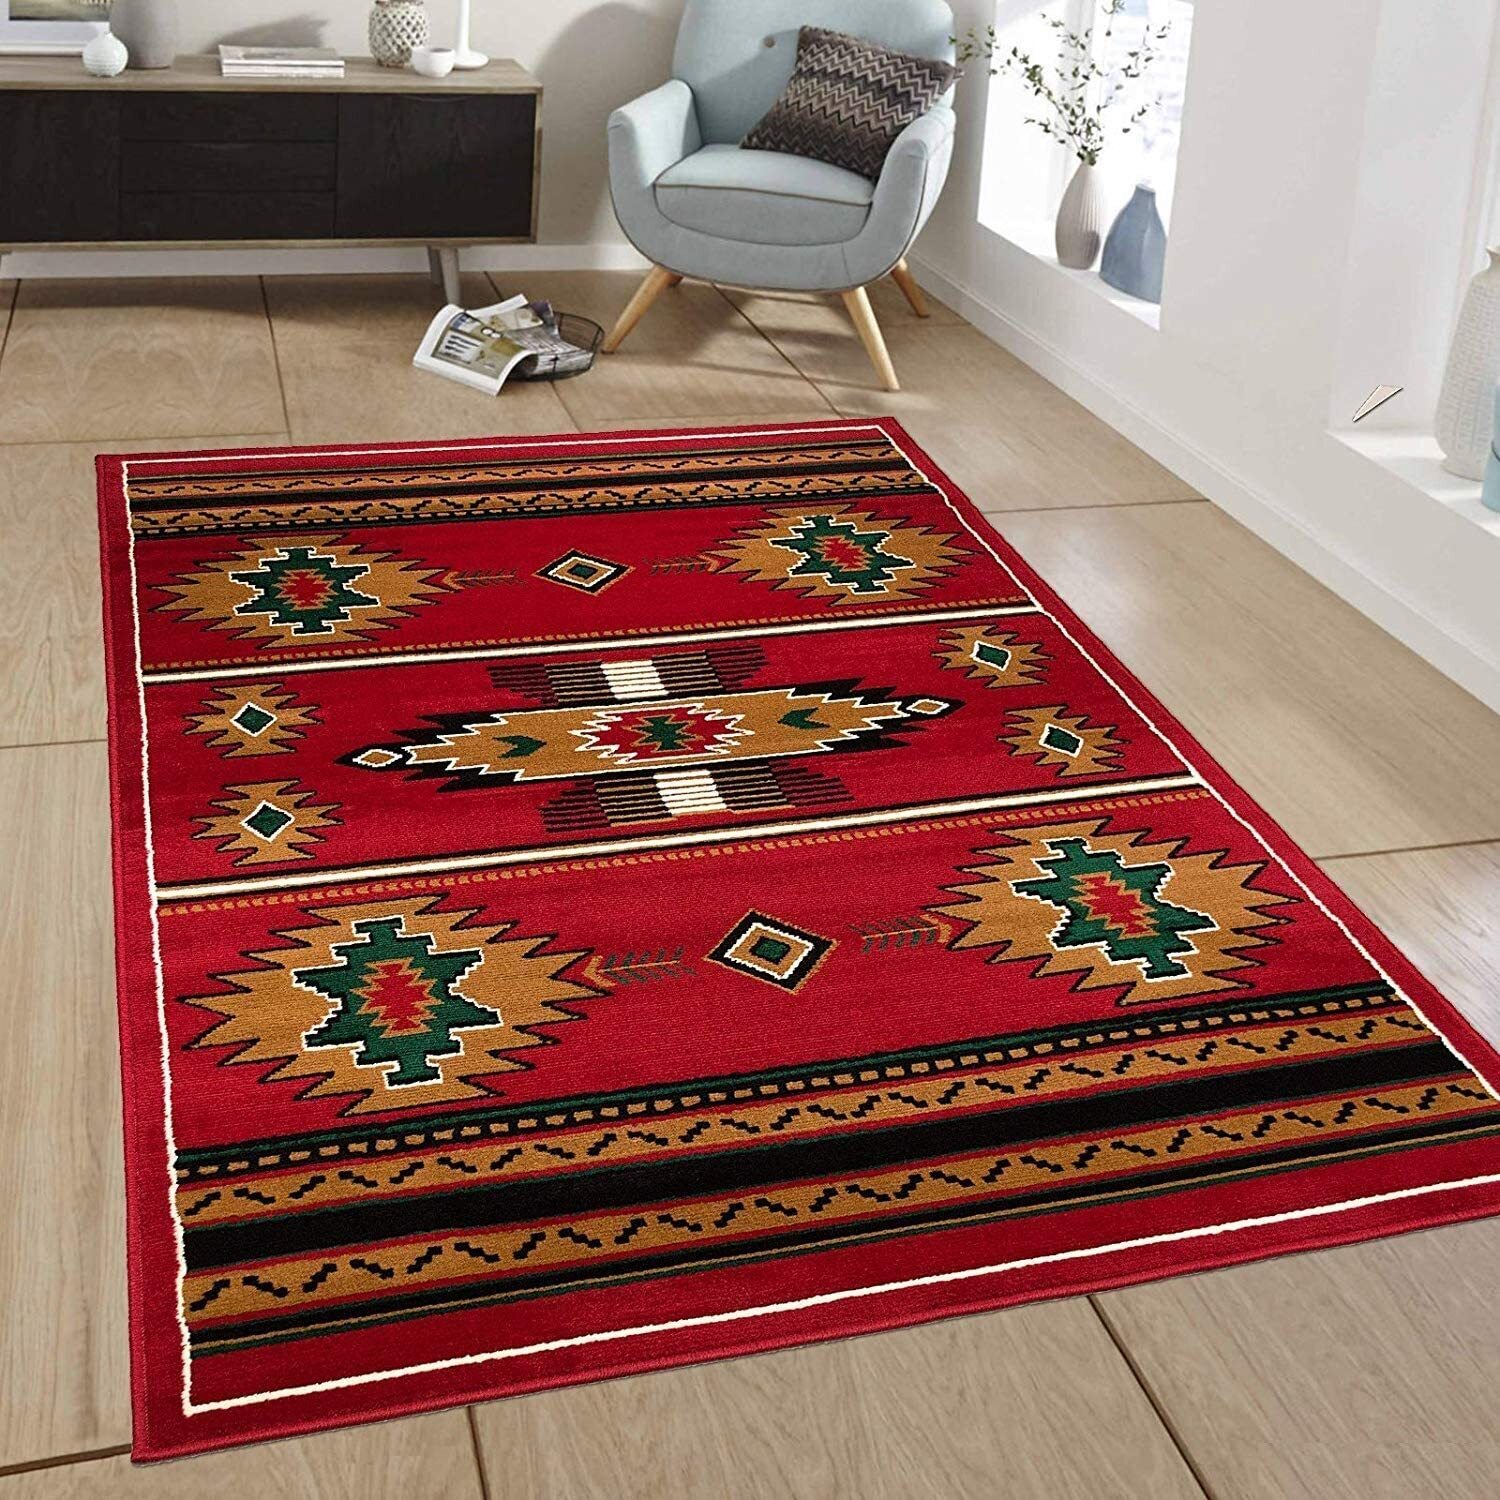 Navajo Inspired Red Patterned Rug